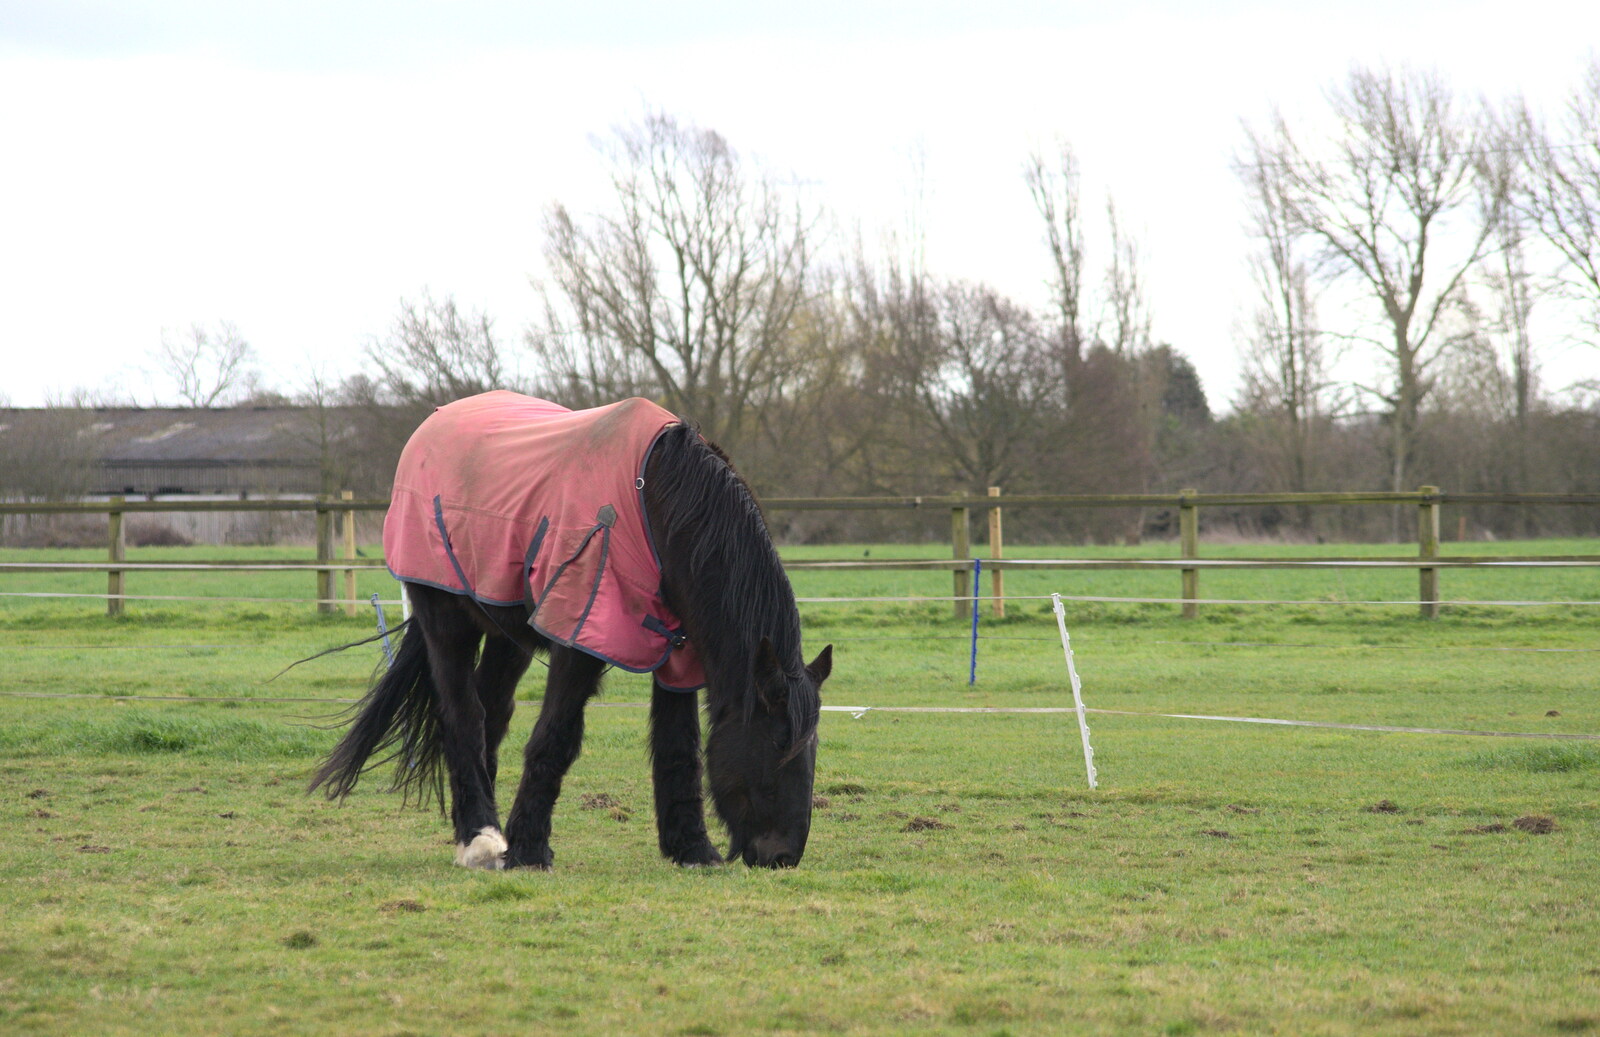 Chinner the horse from Harry's Birthday, Brome, Suffolk - 28th March 2016